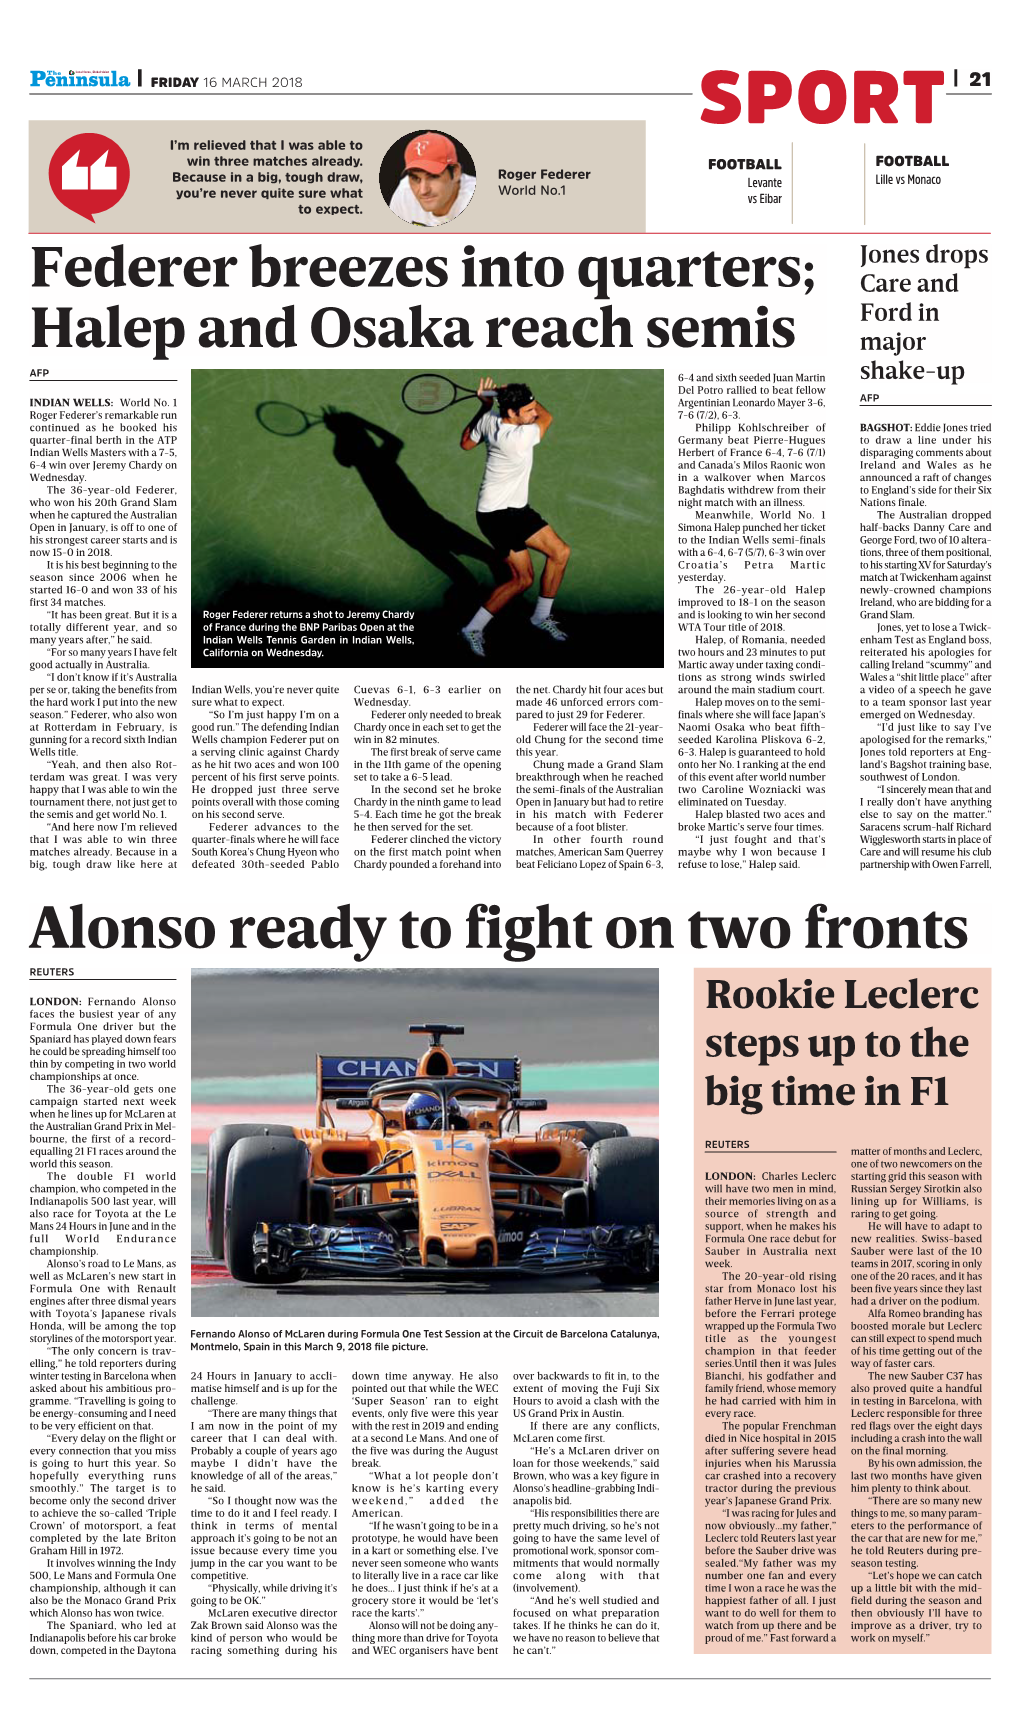 Alonso Ready to Fight on Two Fronts